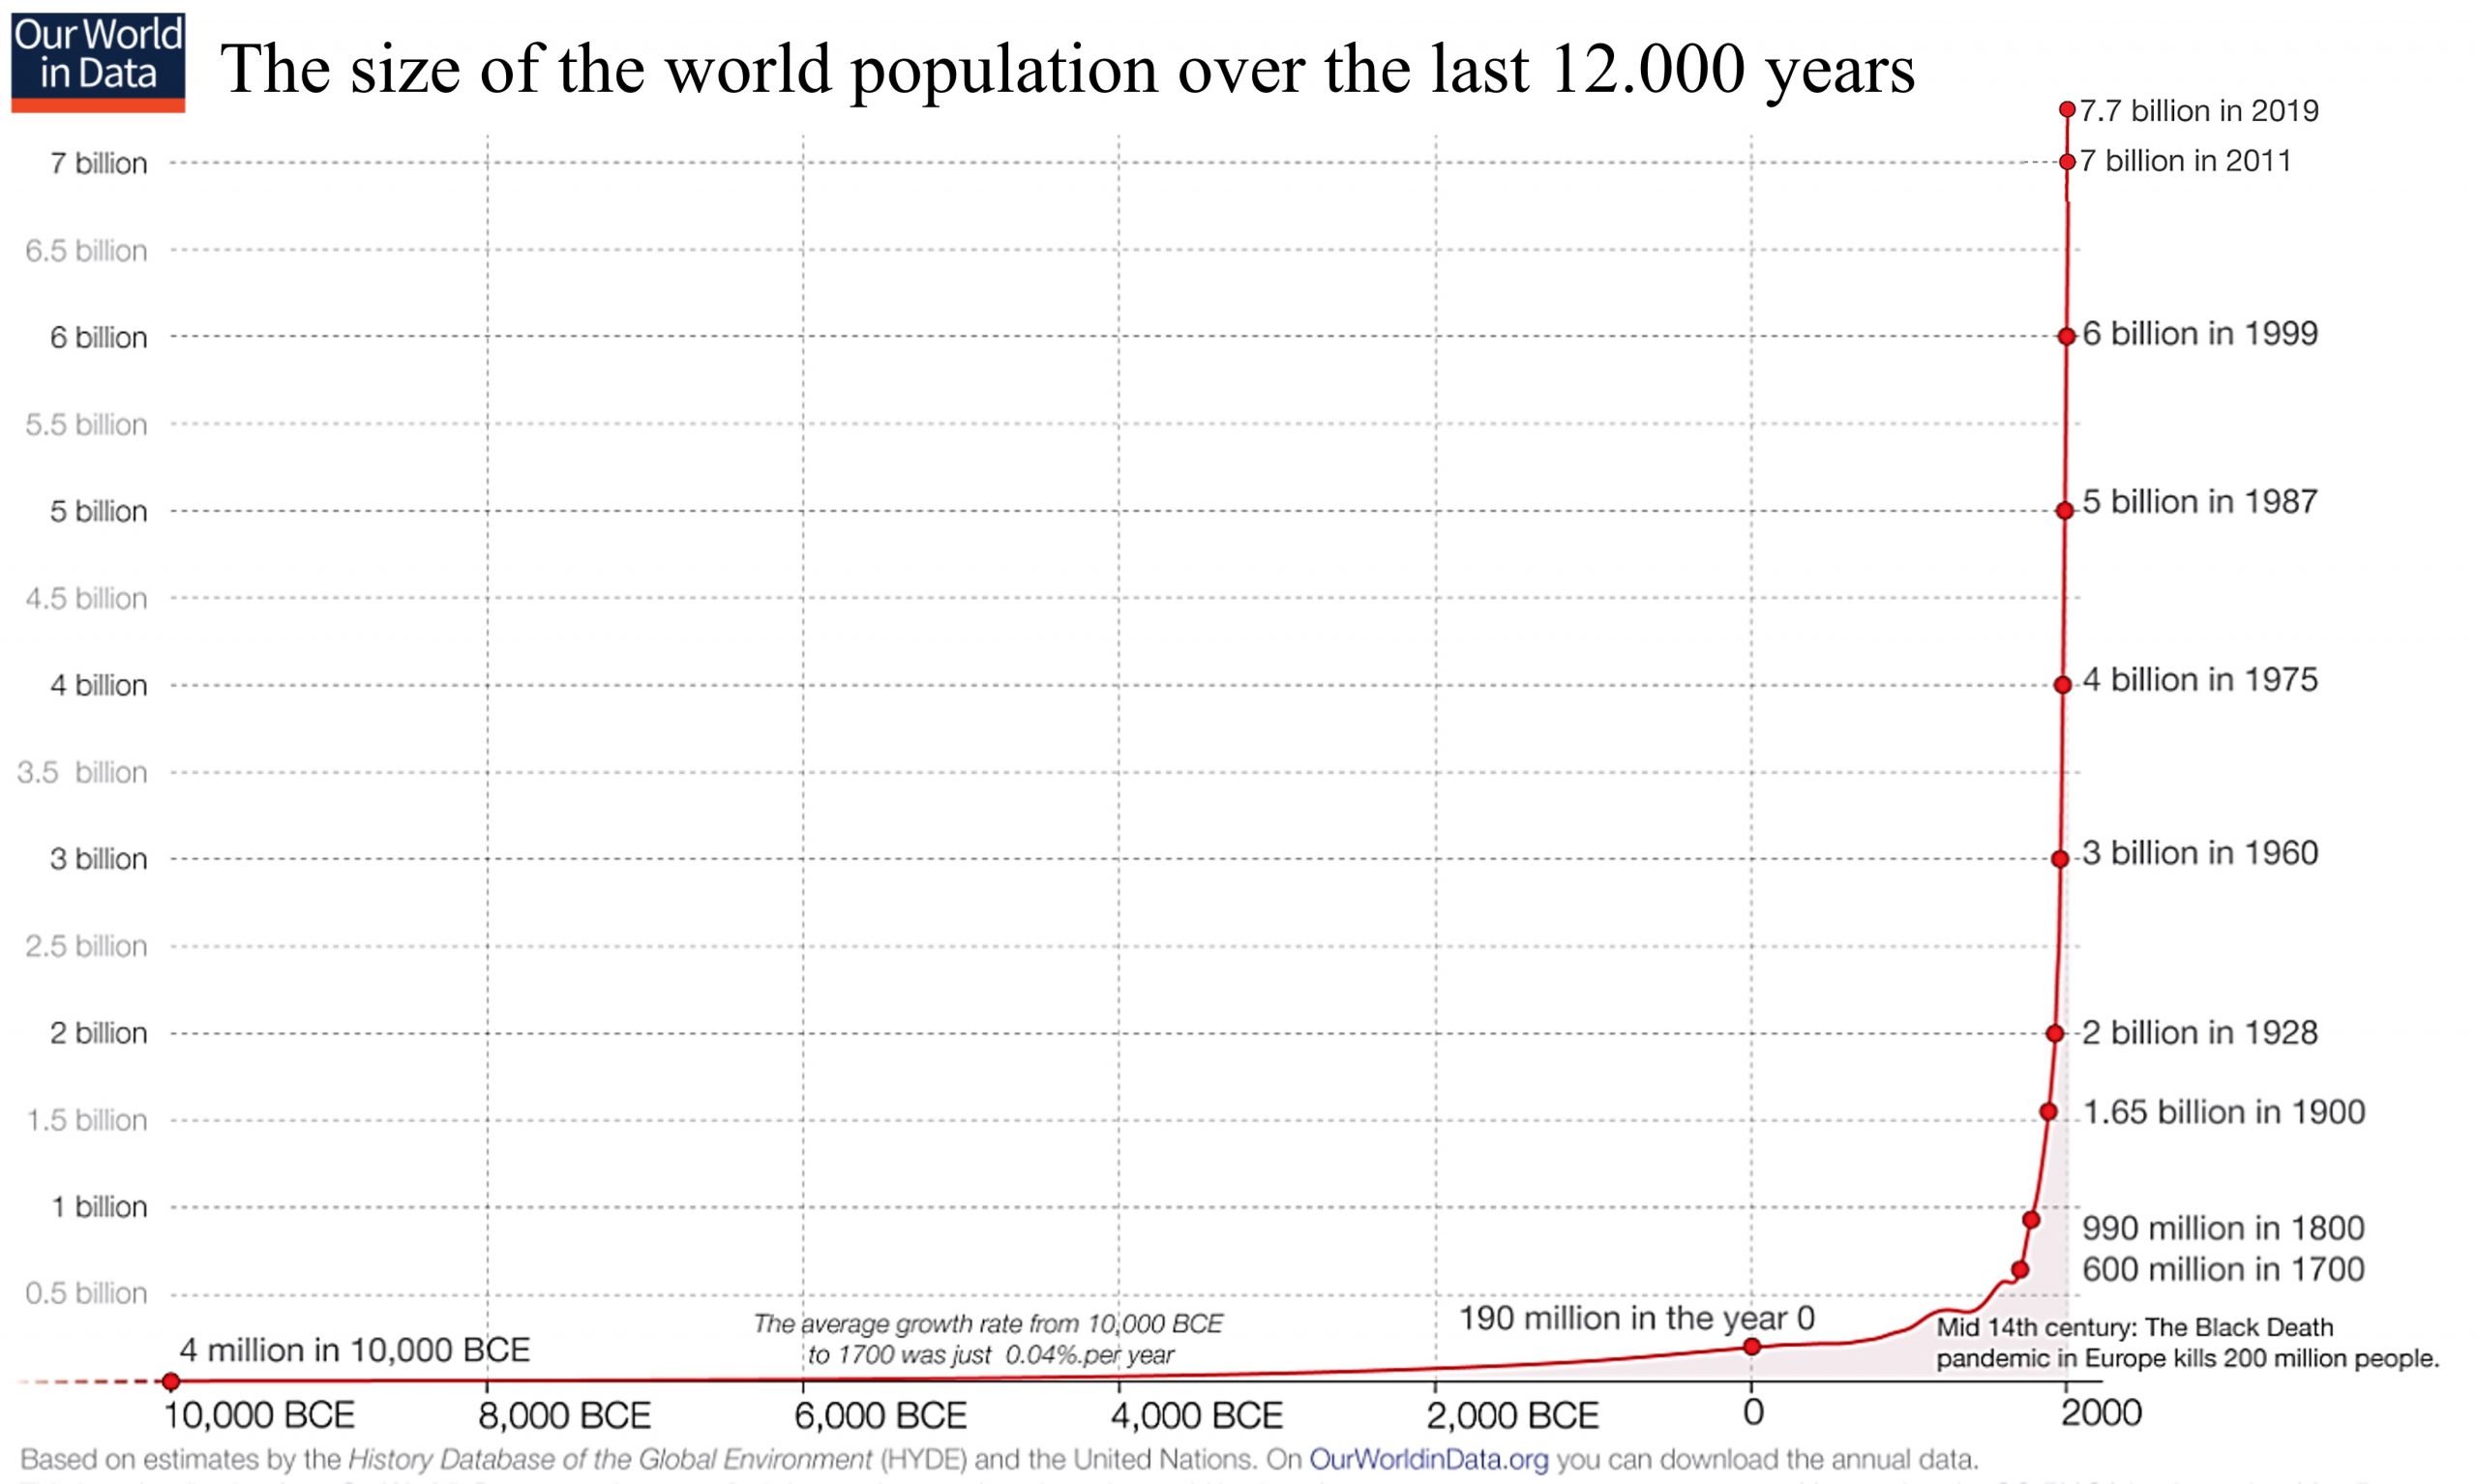 As described in the text, this Figure shows the world's population growing extremely slowly until recently. It has skyrocketed since 1700 AD.